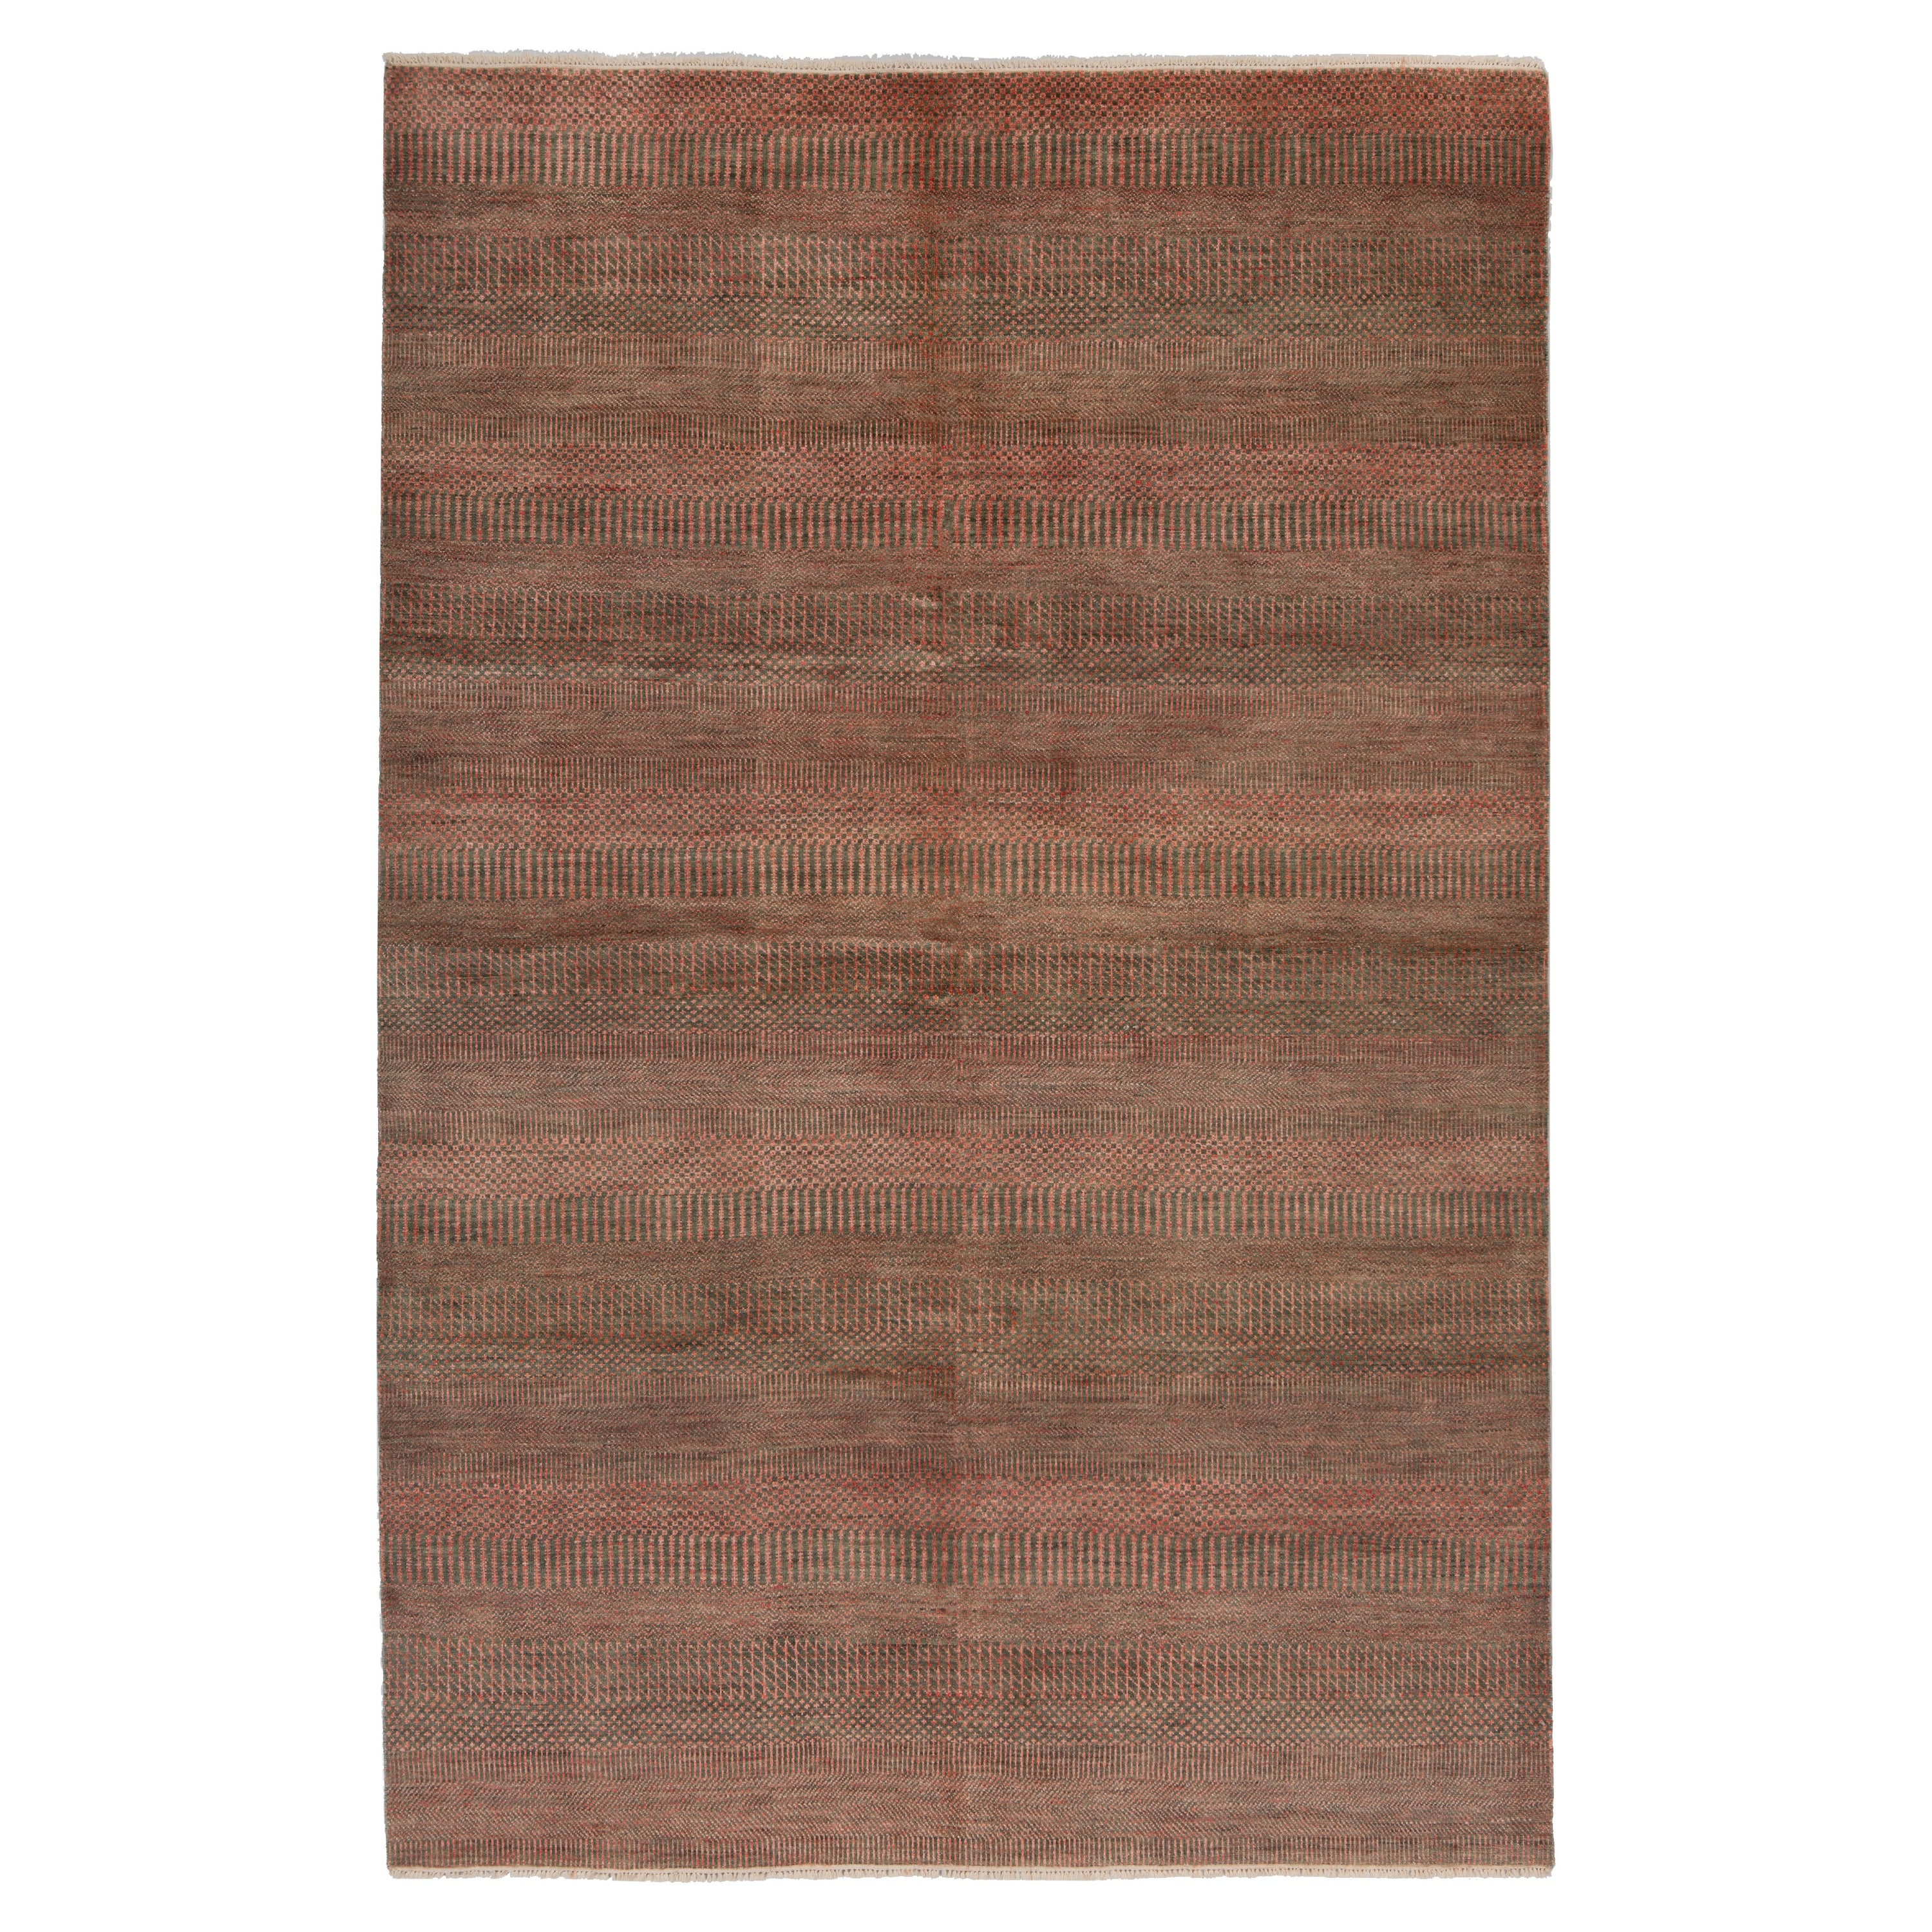 Hand-knotted Wool Rug - 9'4" x 6'1" Default Title